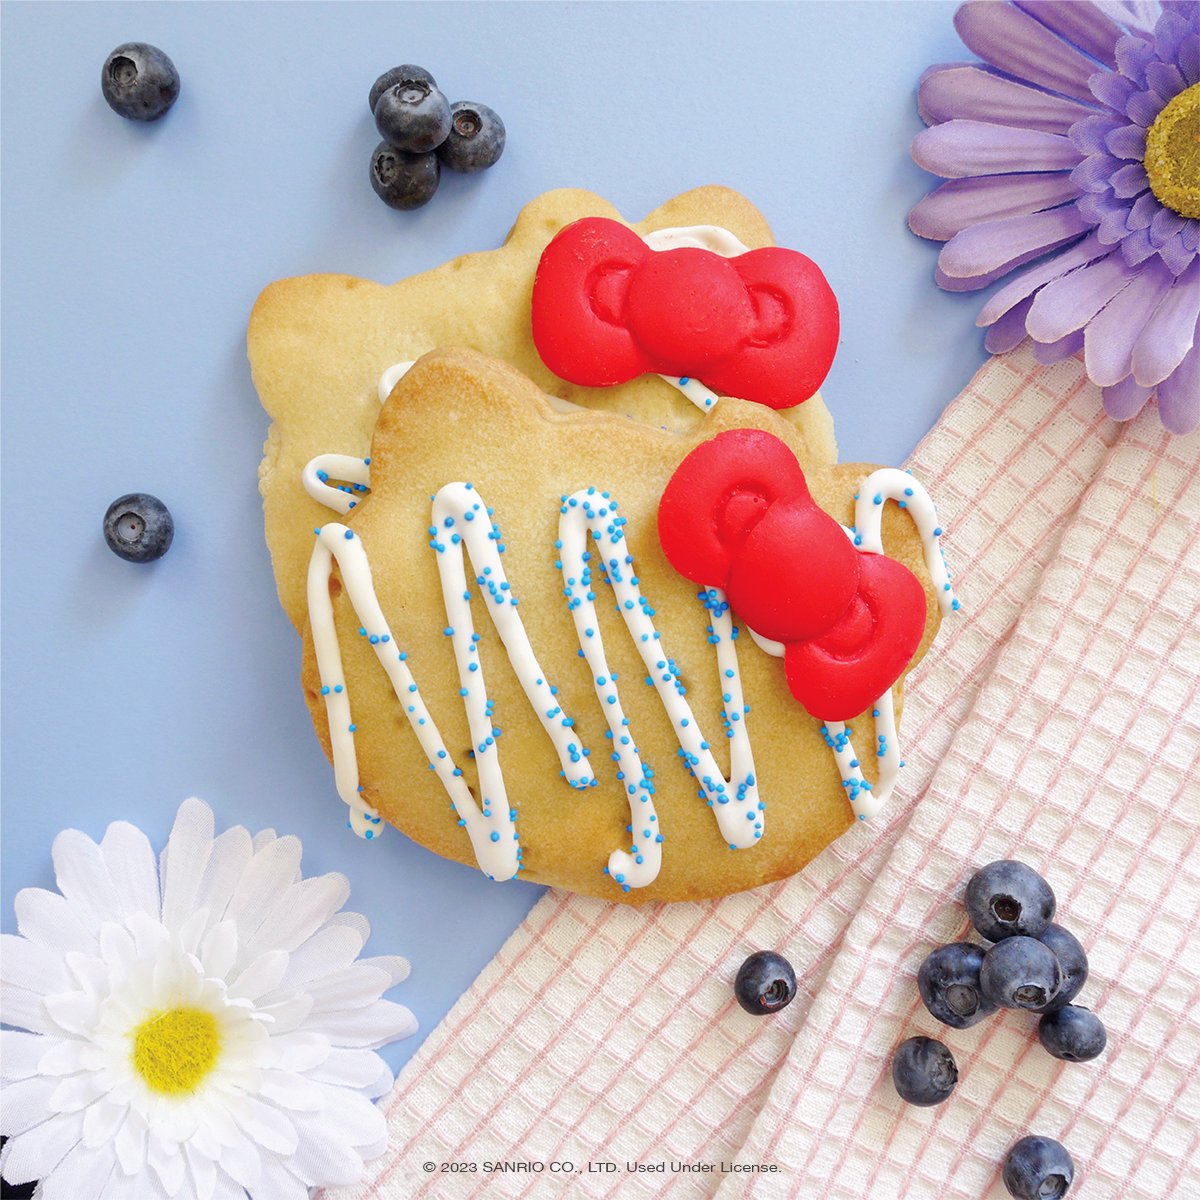 Our seasonal Blueberry Pocket Pies are available for a limited time only at the Hello Kitty Grand Cafe🫐💞